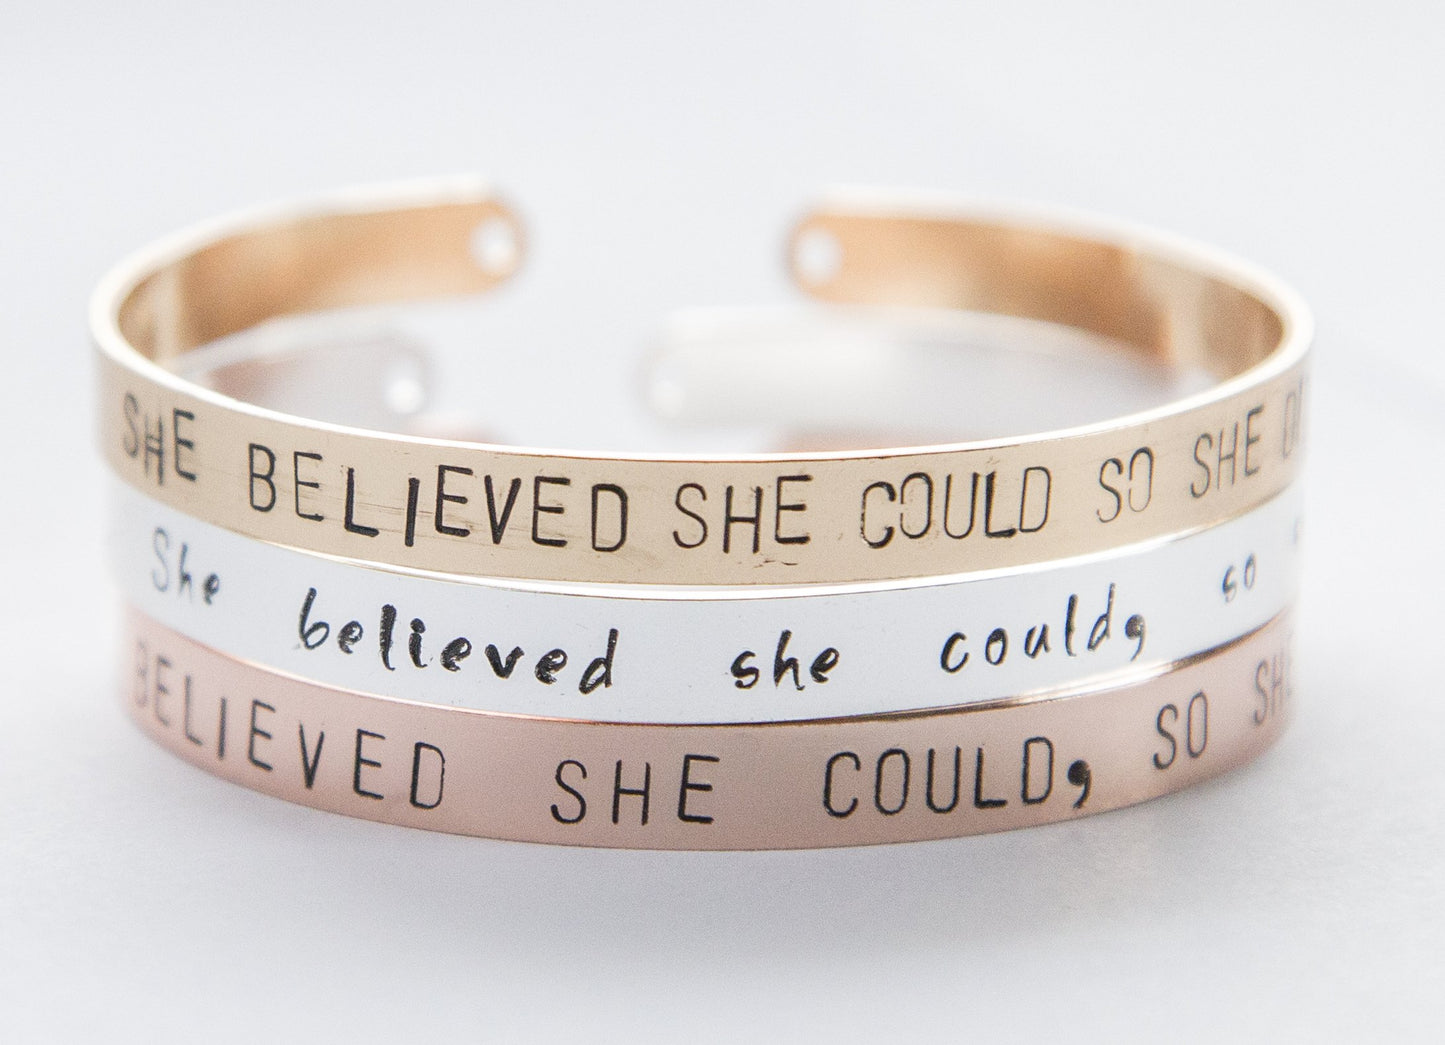 She Believed She Could so She Did - armband